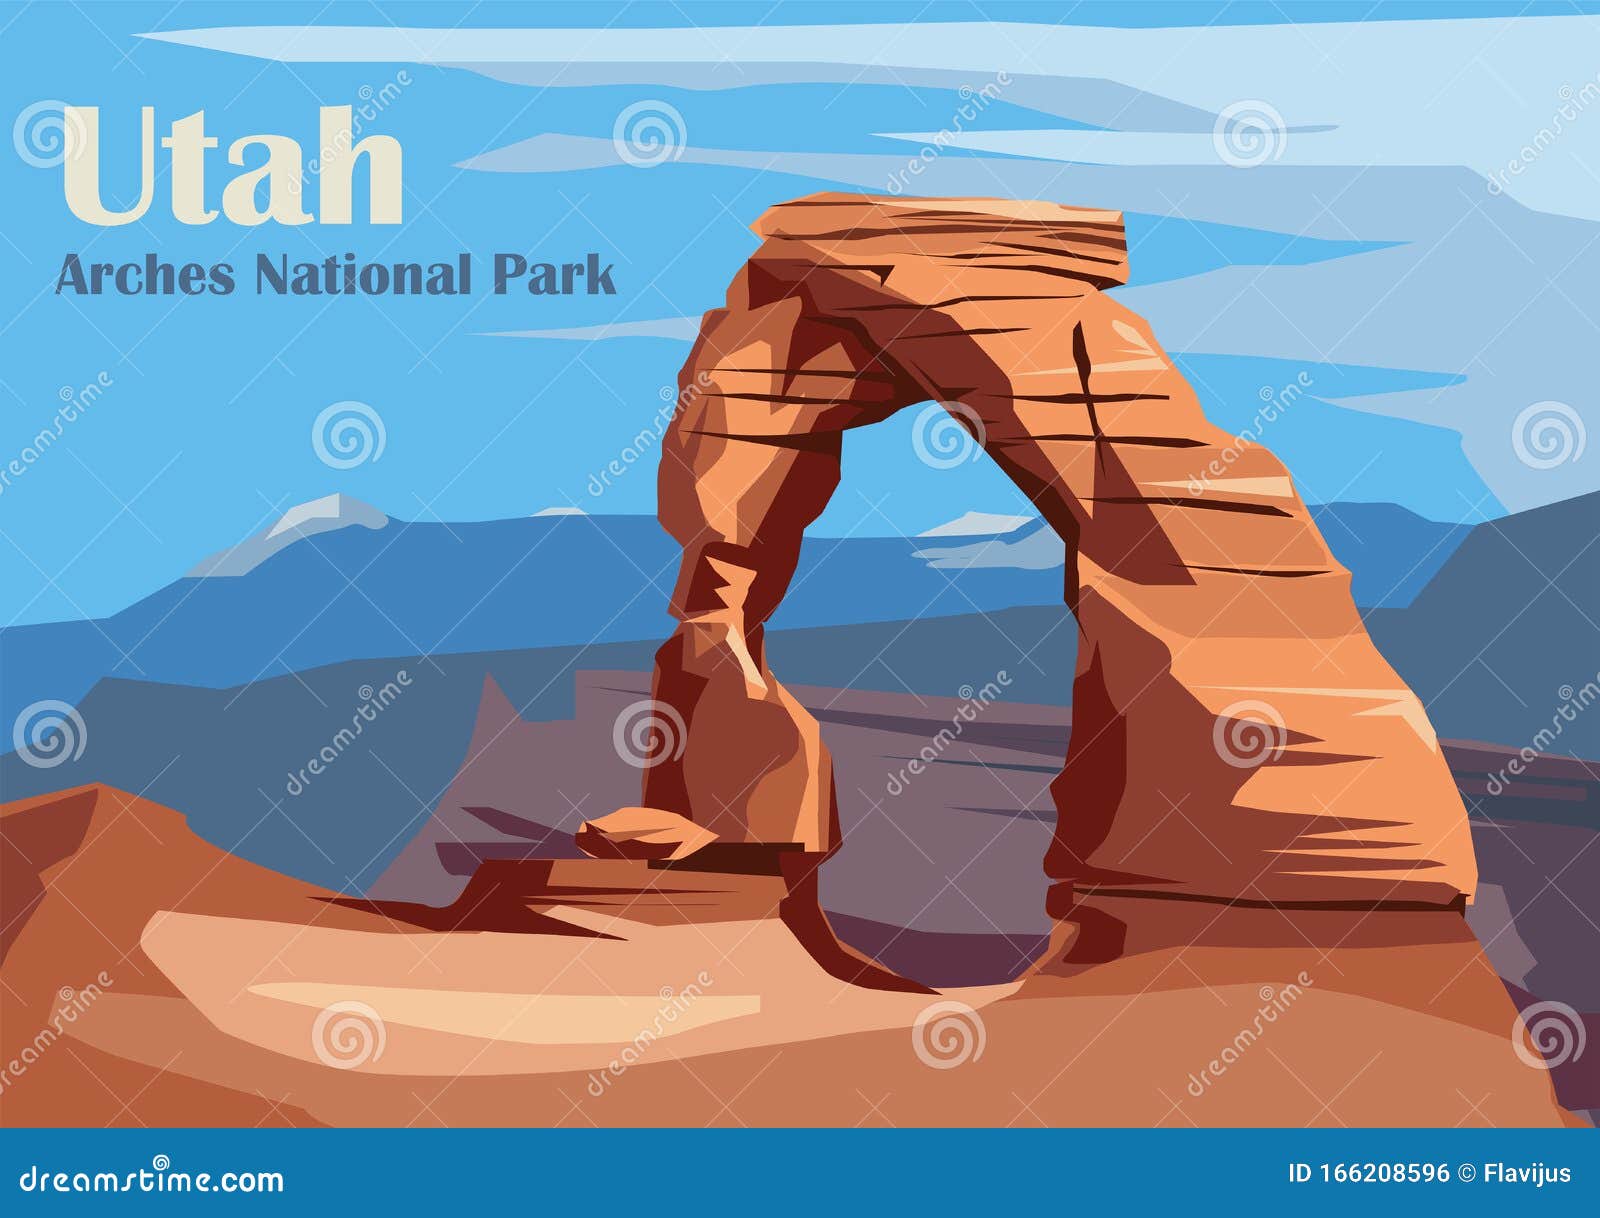 Unique Arches National Park Sketch Sand Dune Drawing for Adult